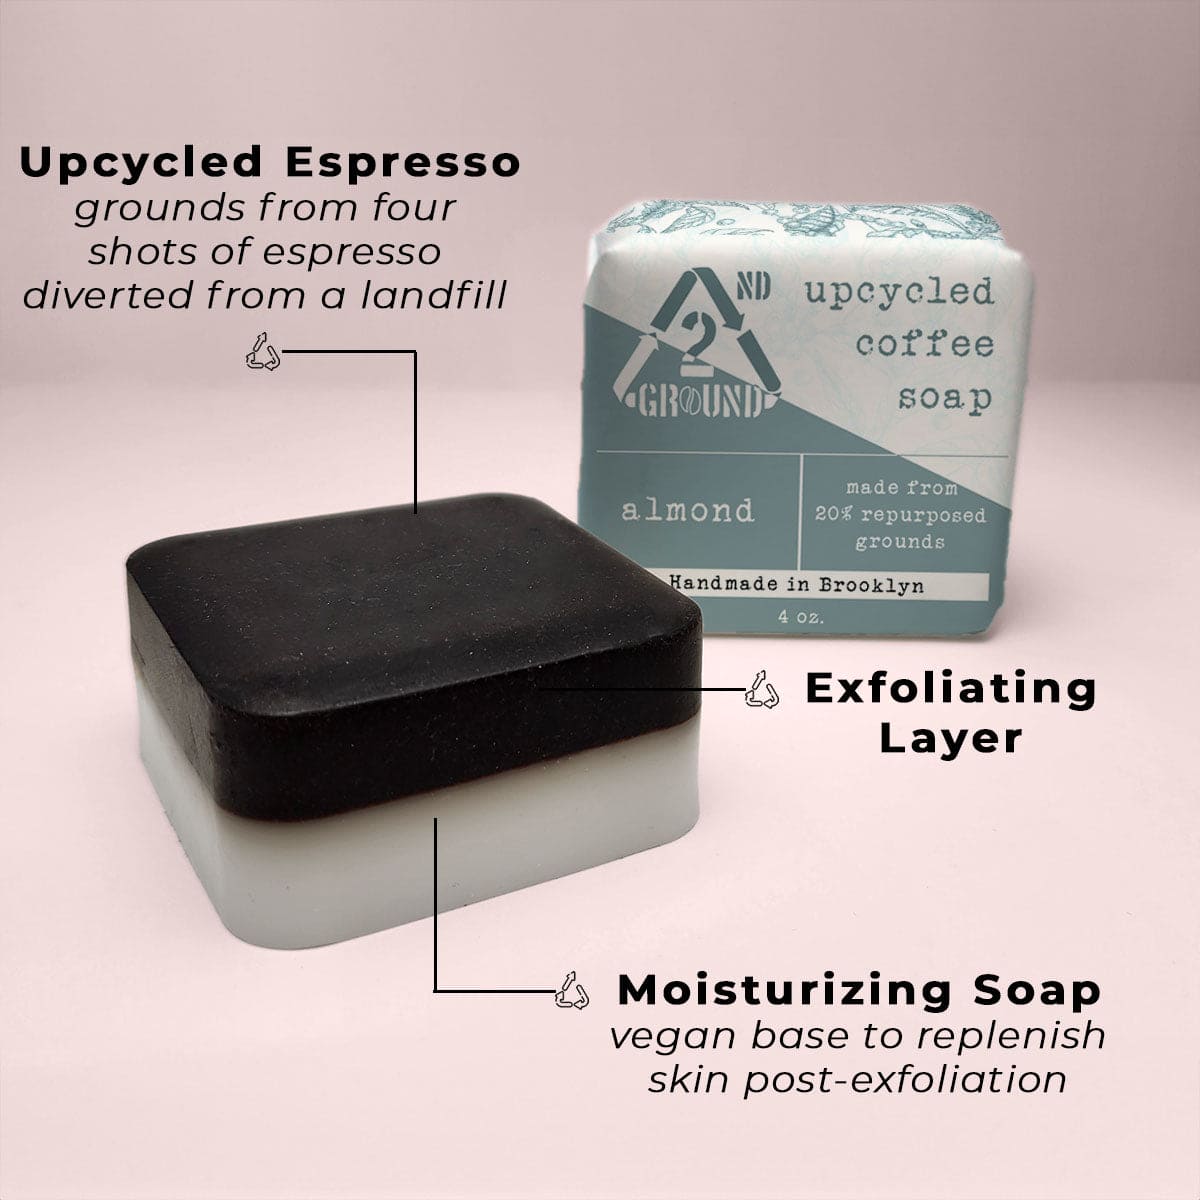 Benefits of almond upcycled coffee soap